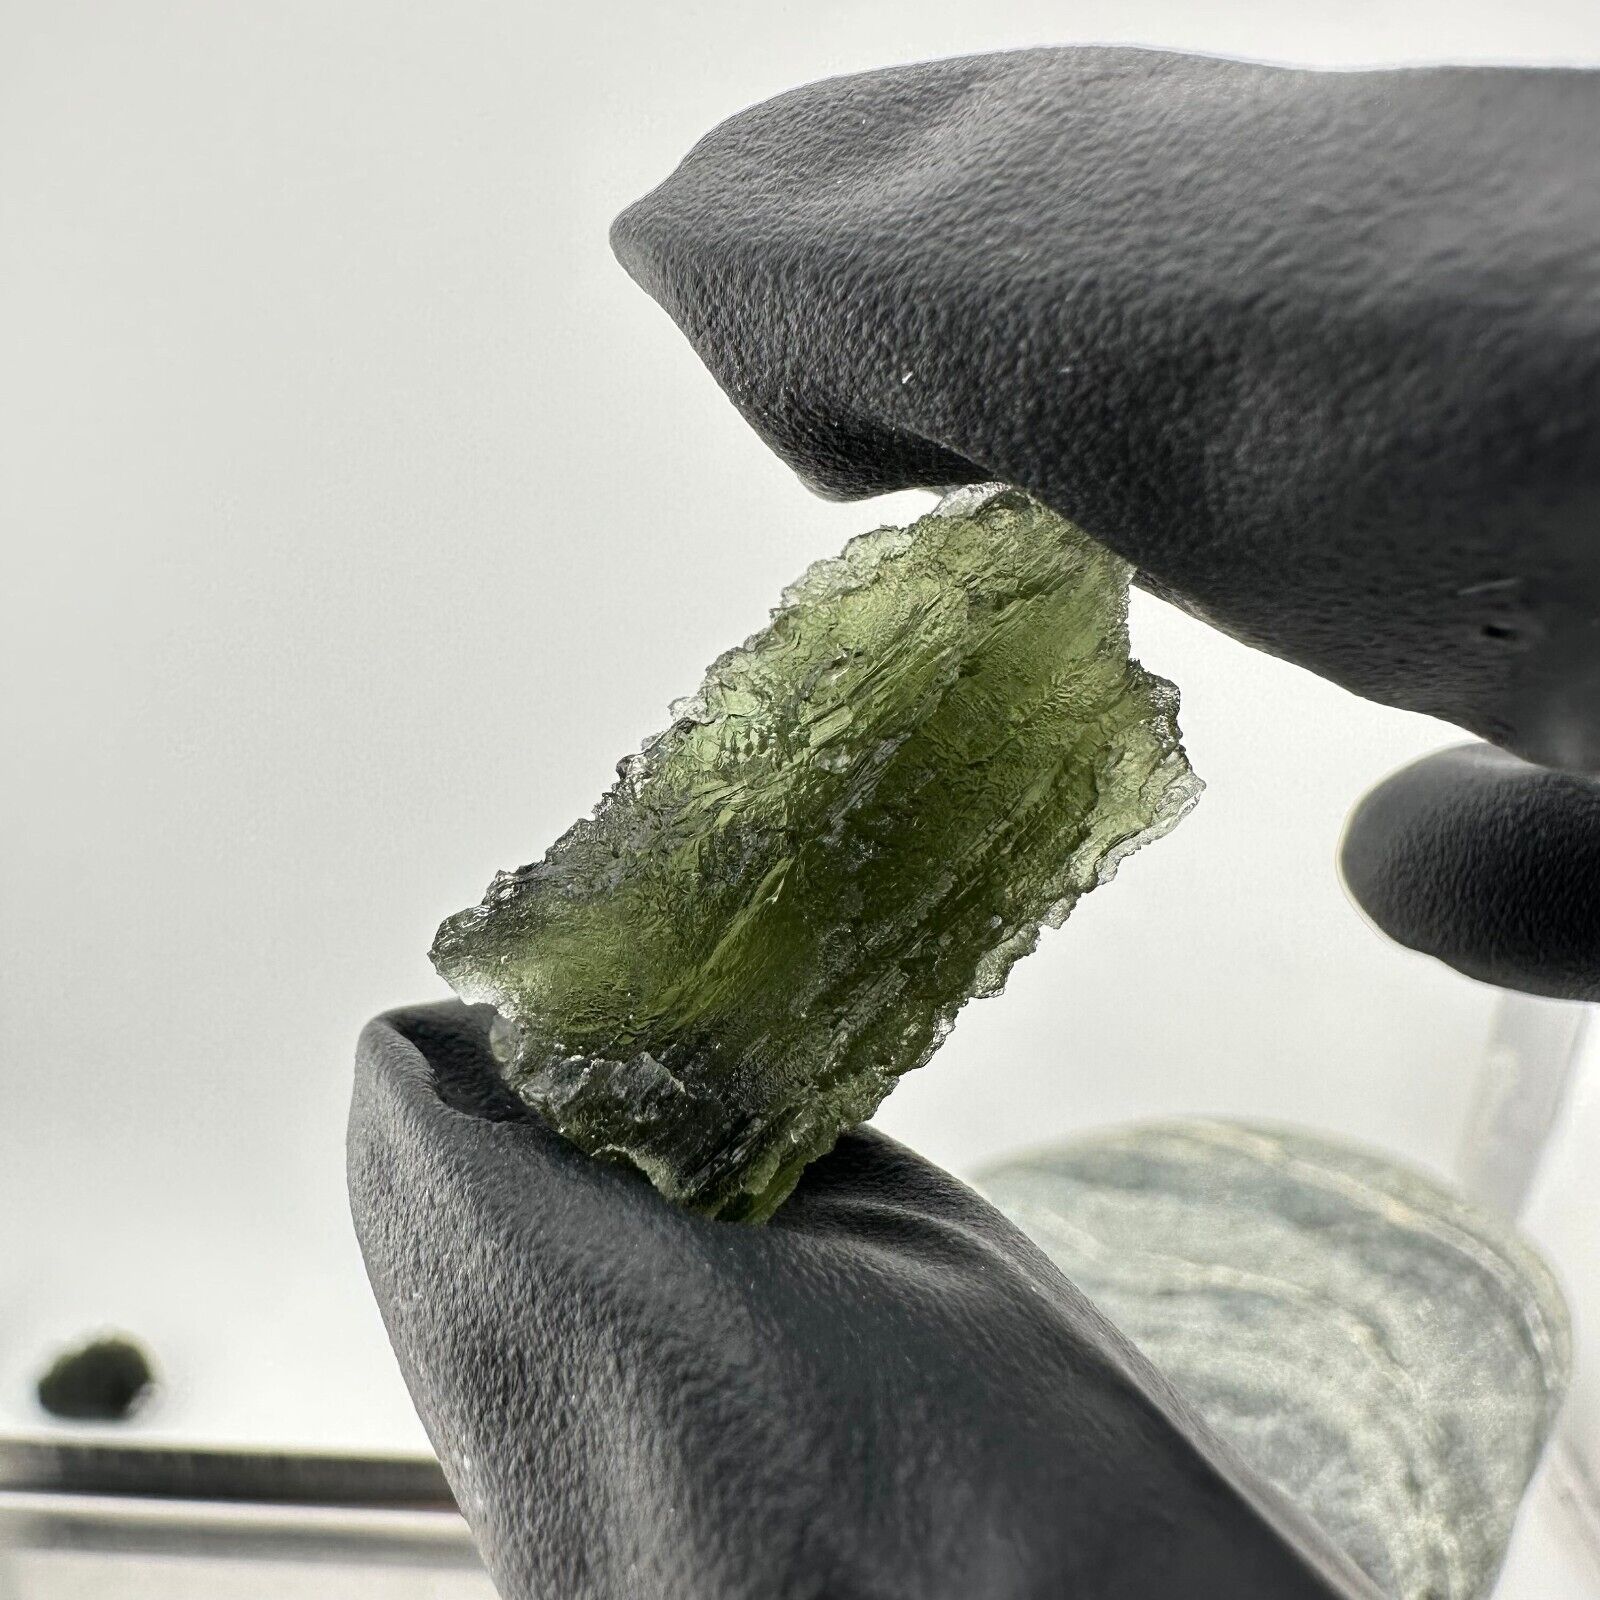 6.2g Museum Quality Moldavite from Czech Republic (CoA) Collect with Confidence